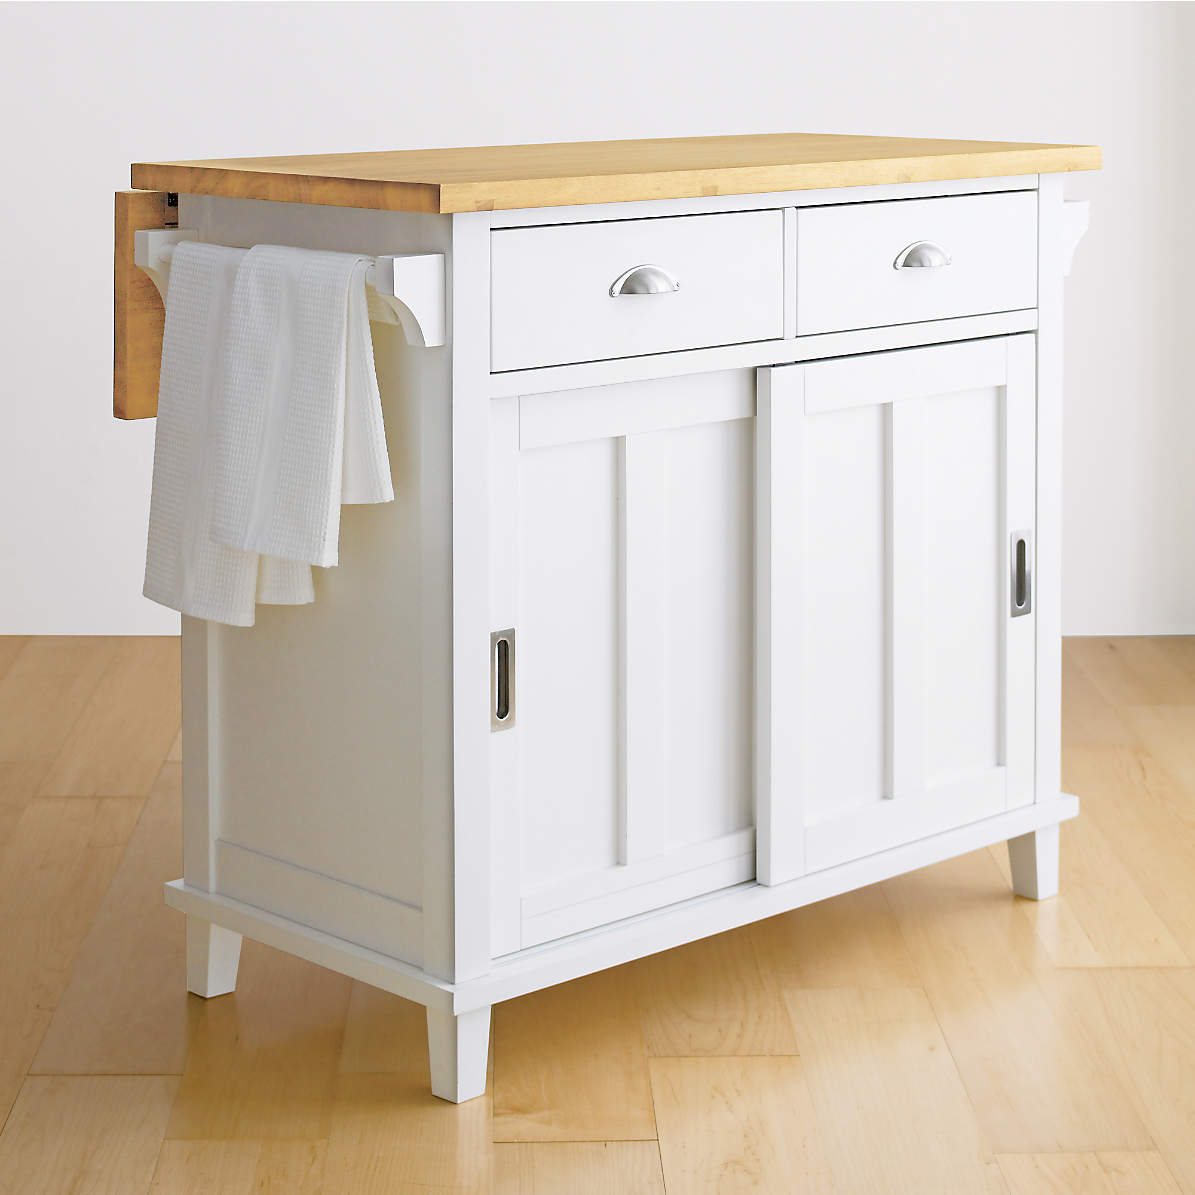 Belmont White Kitchen Island Reviews Crate And Barrel